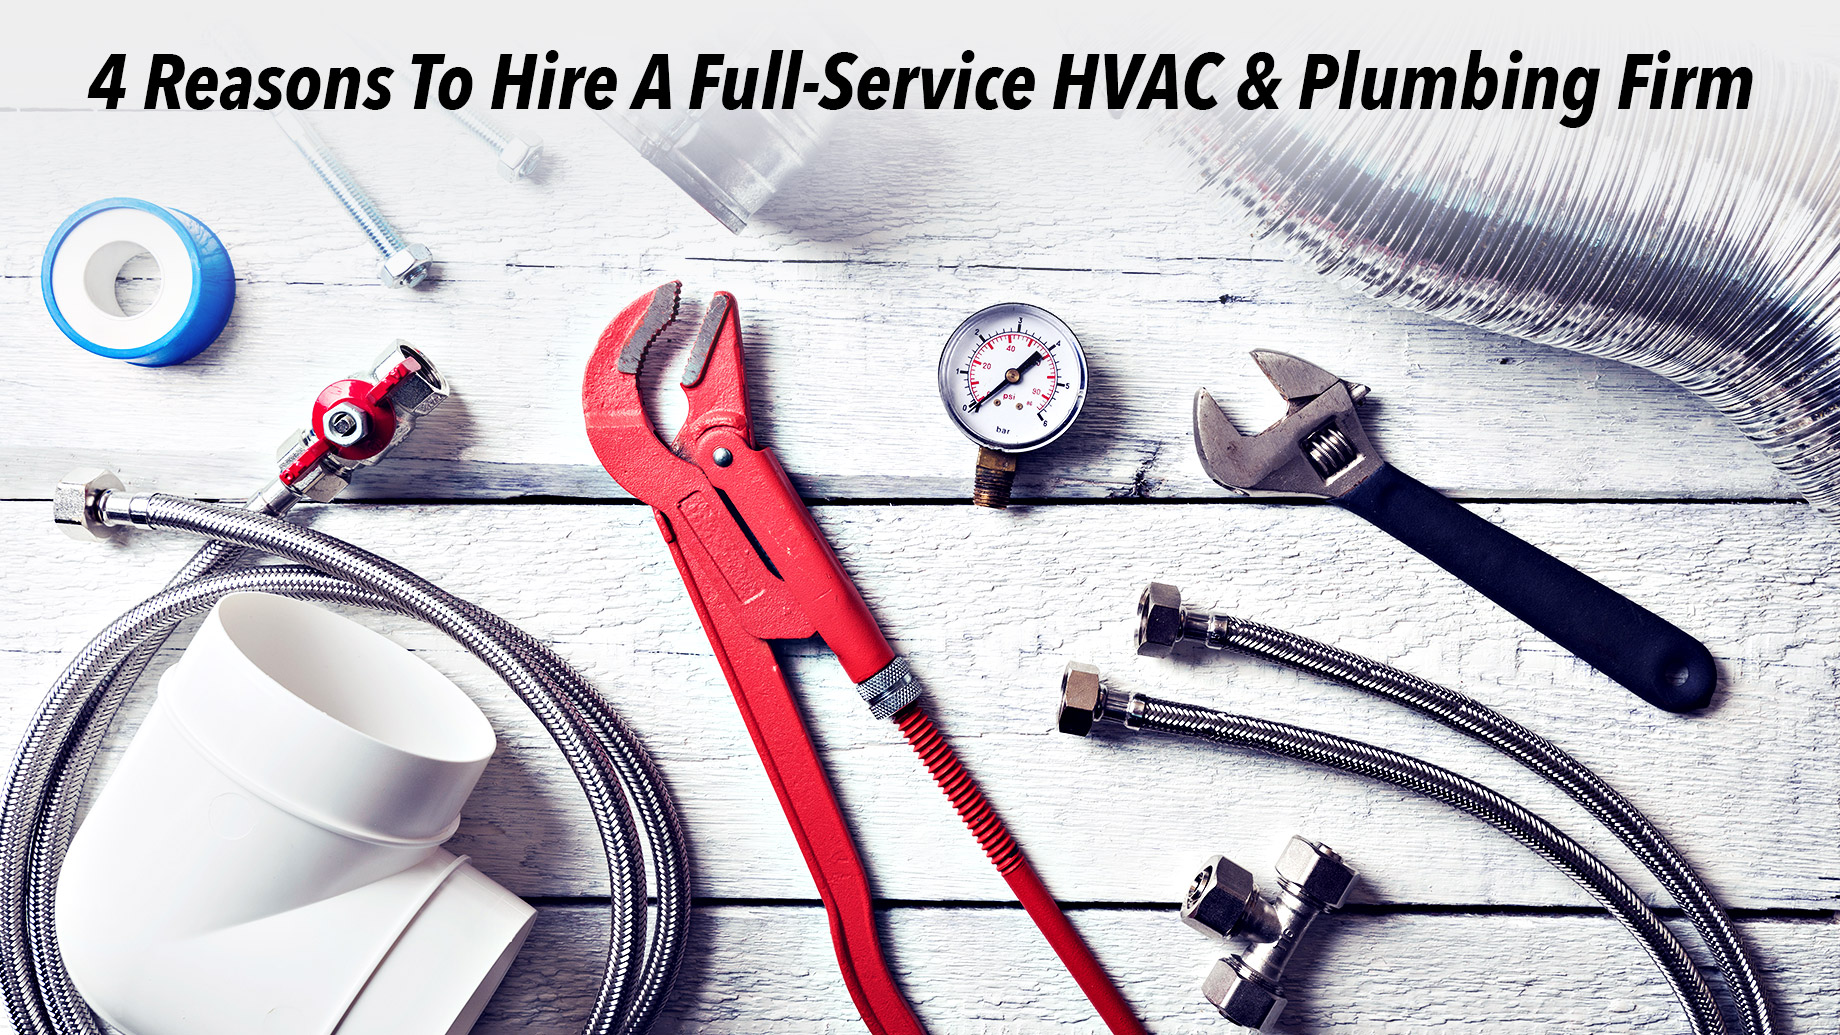 4 Reasons To Hire A Full-Service HVAC & Plumbing Firm